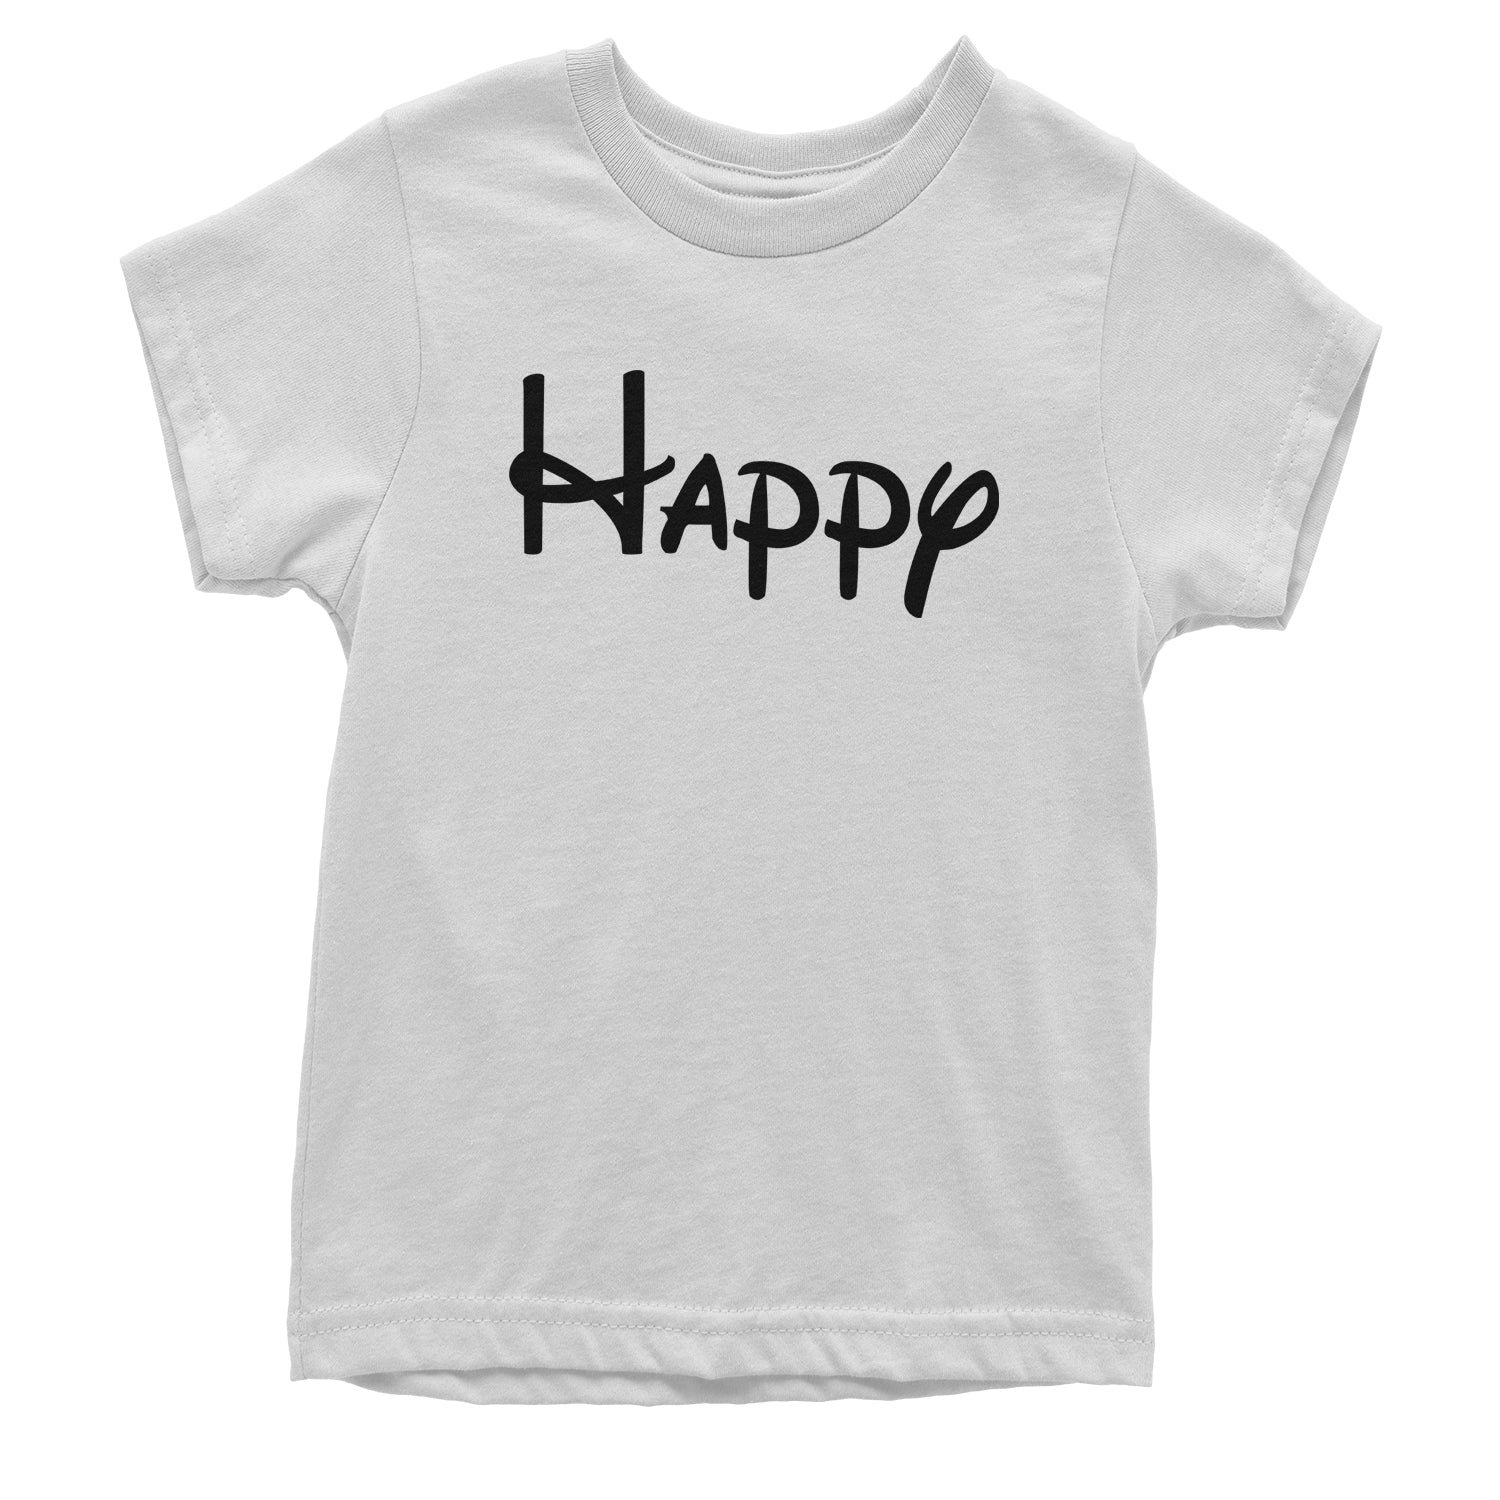 Happy - 7 Dwarfs Costume Youth T-shirt and, costume, dwarfs, group, halloween, matching, seven, snow, the, white by Expression Tees